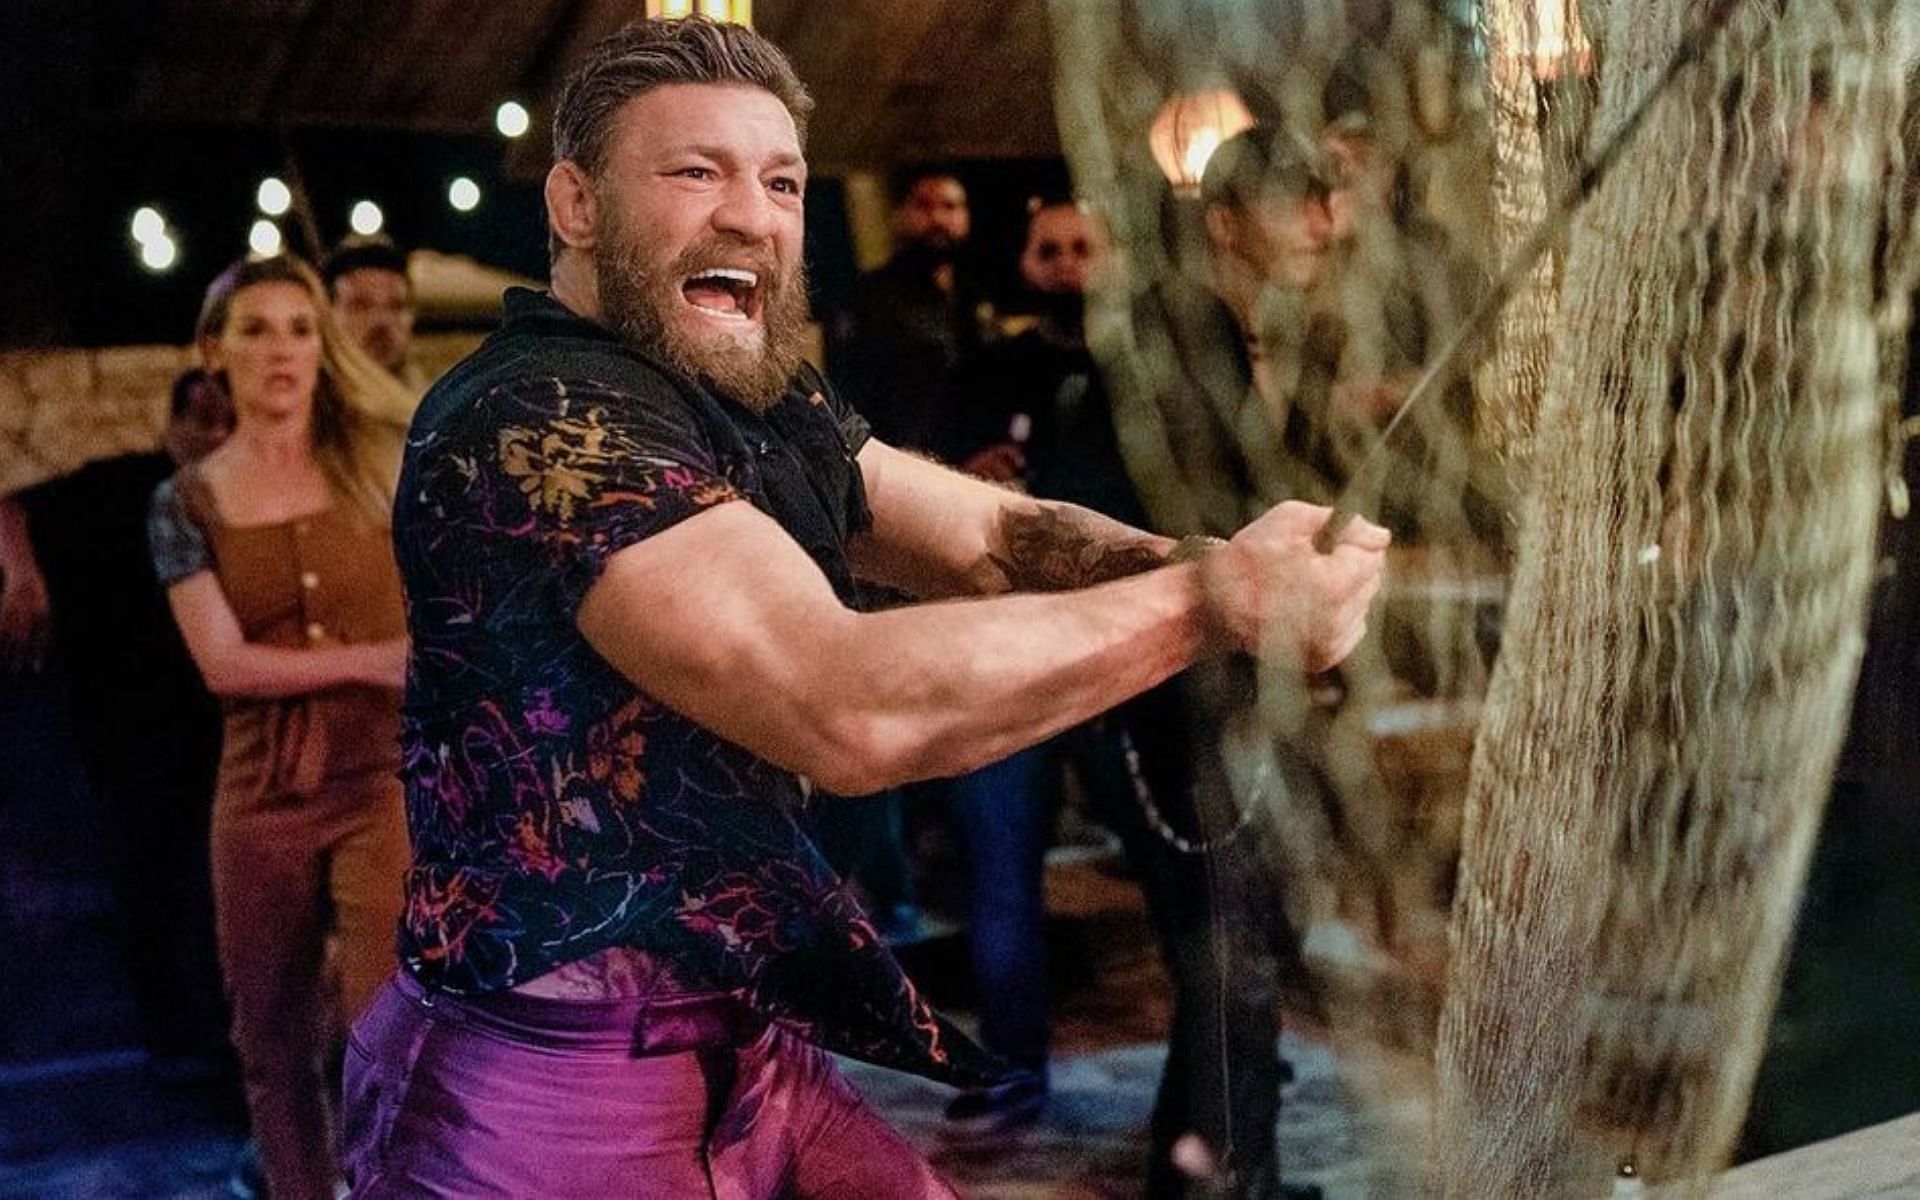 Conor McGregor has earned plaudits from cinephiles and fight fans alike for his portrayal of 